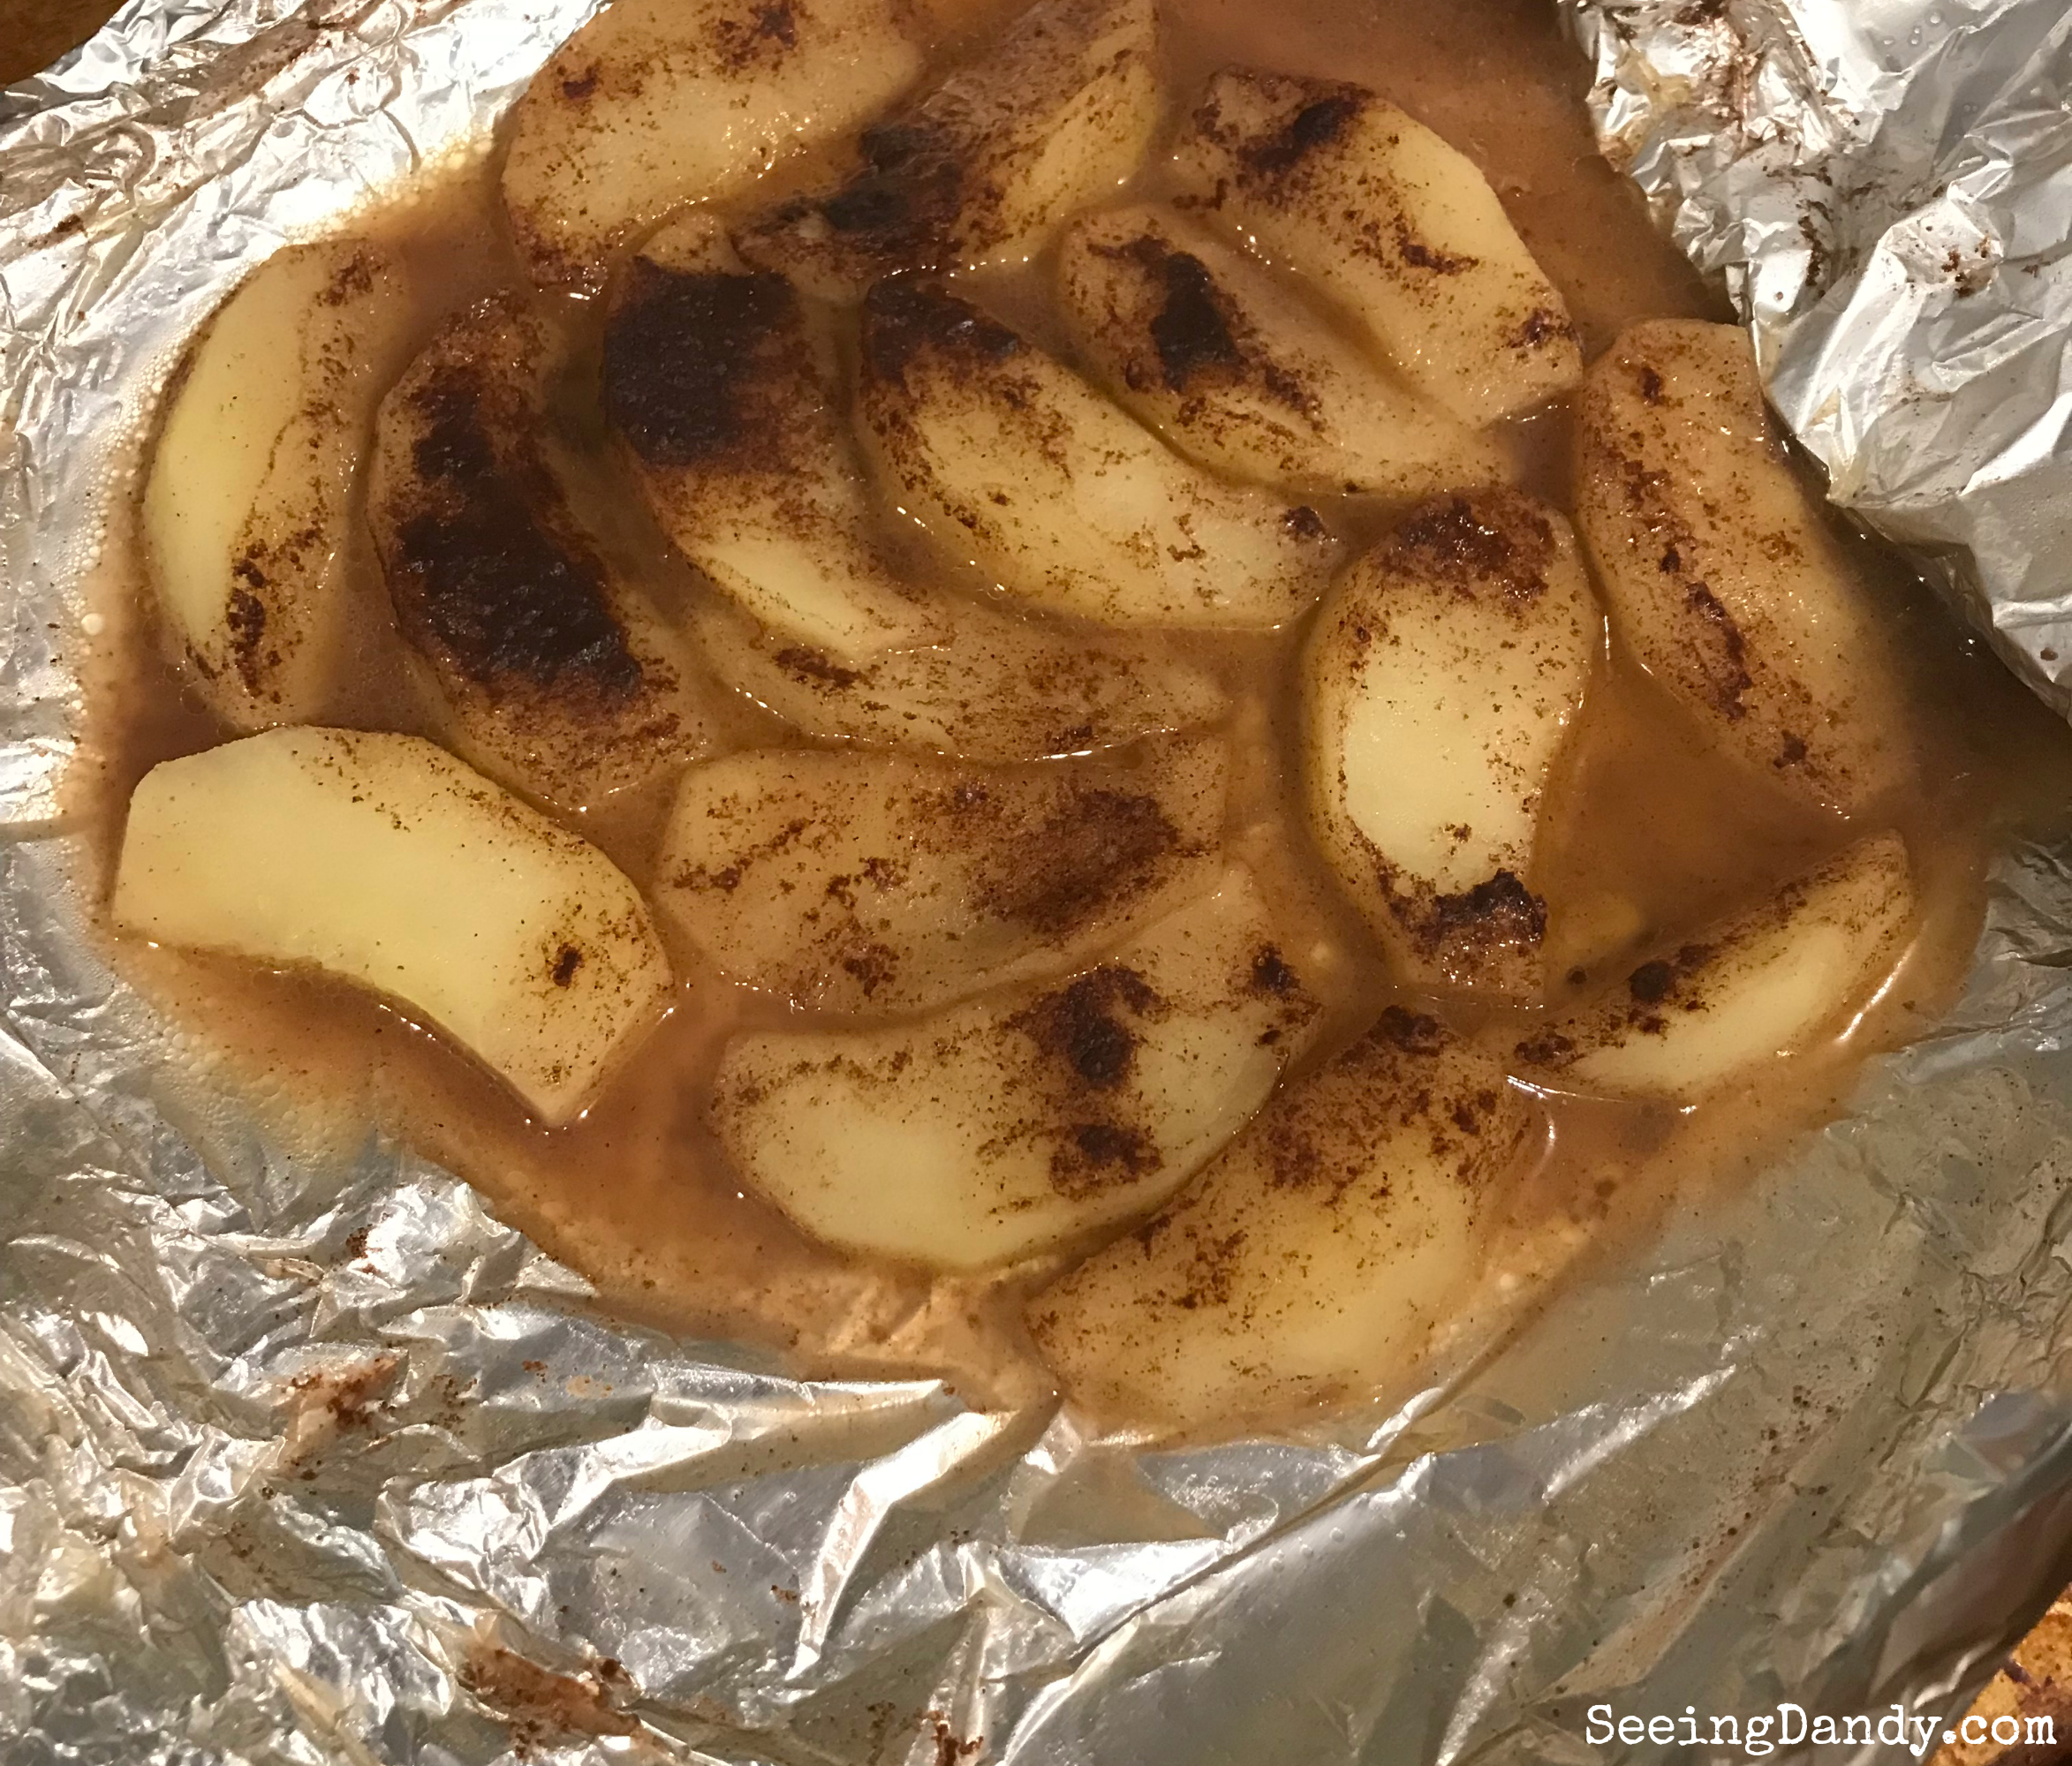 Foil baked apples hot and straight from the oven.